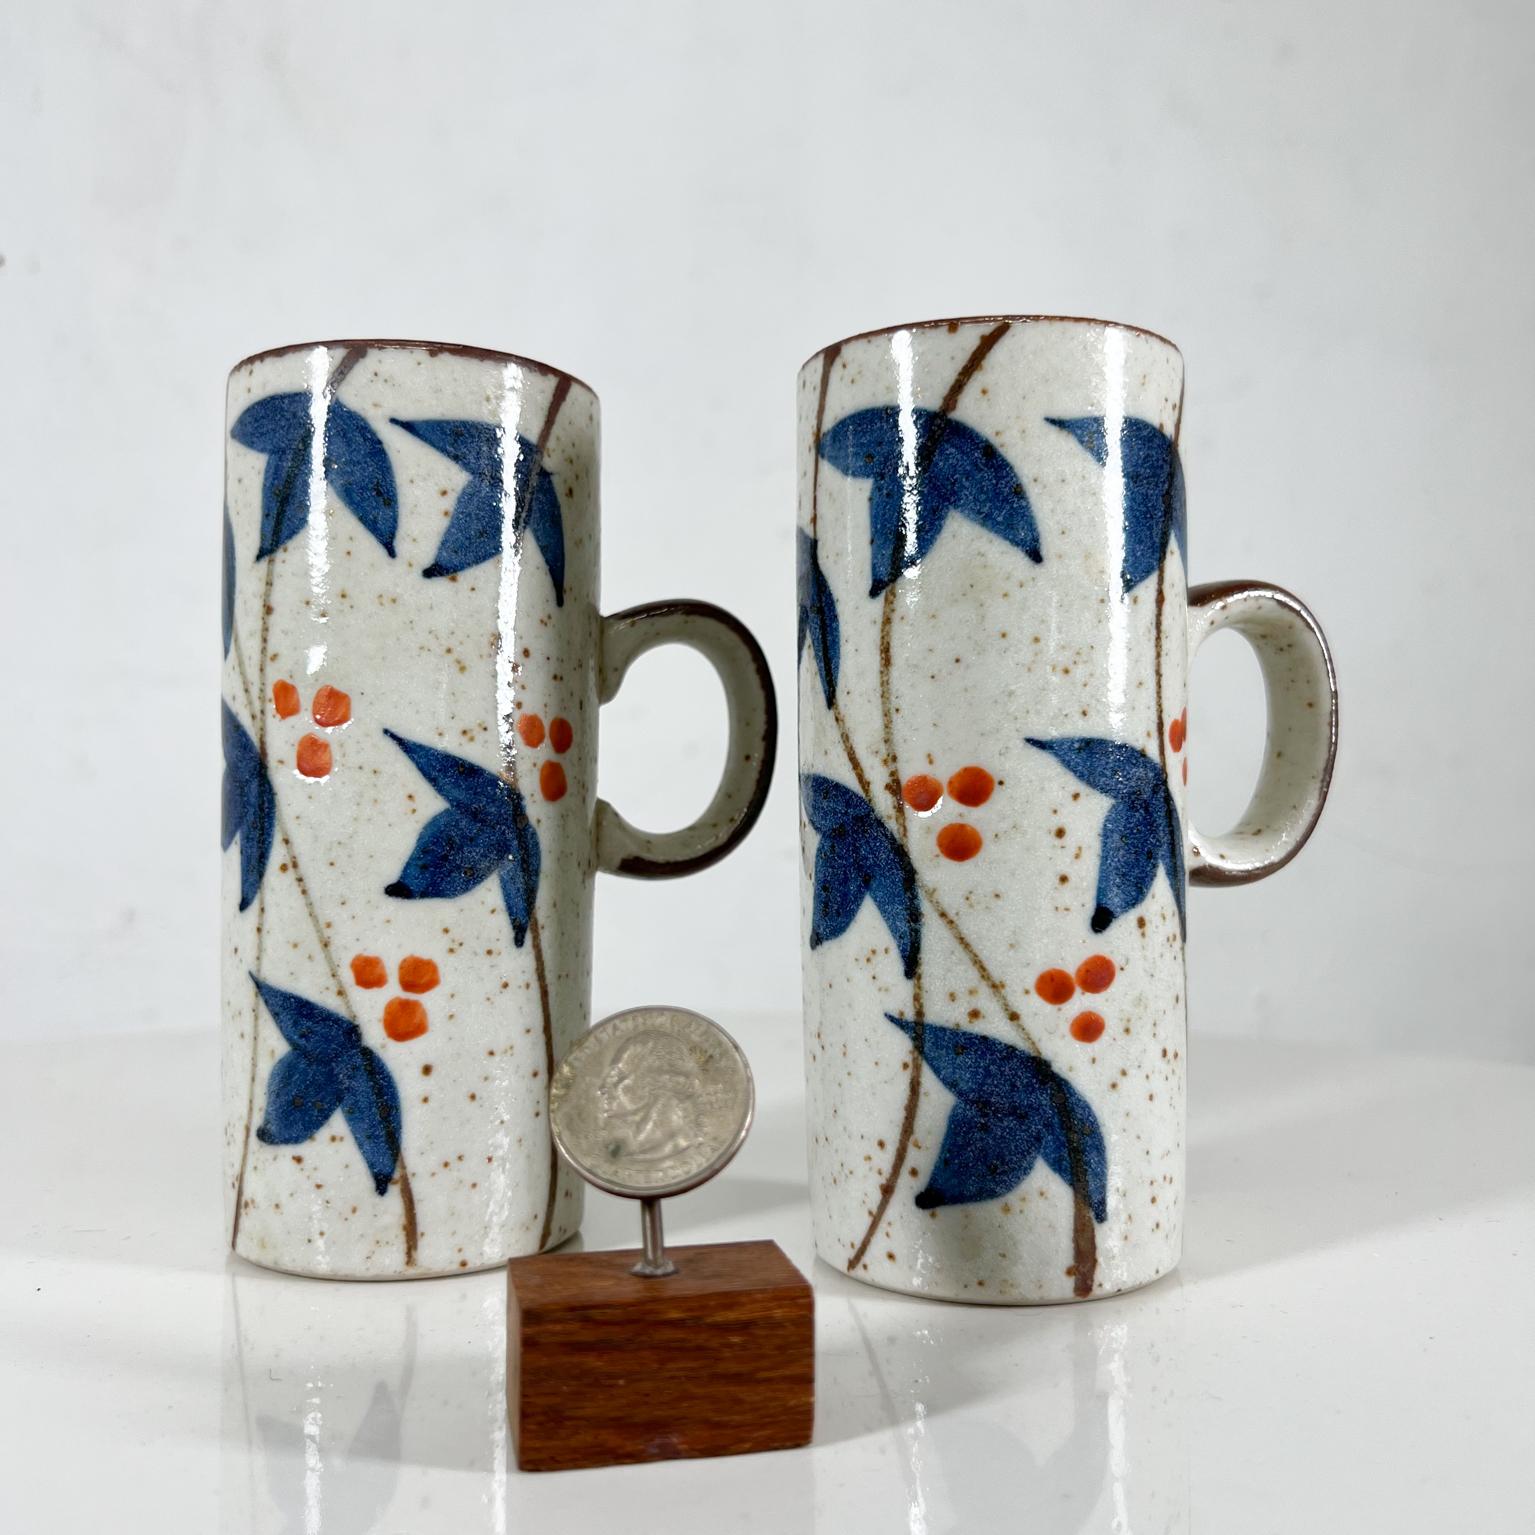 1960s Asian Blue MCM Organic stoneware pottery coffee mugs Hand Painted
5.38 tall x 2.38 diameter x 3.5 d
Preowned unrestored original vintage condition
See images provided.
 